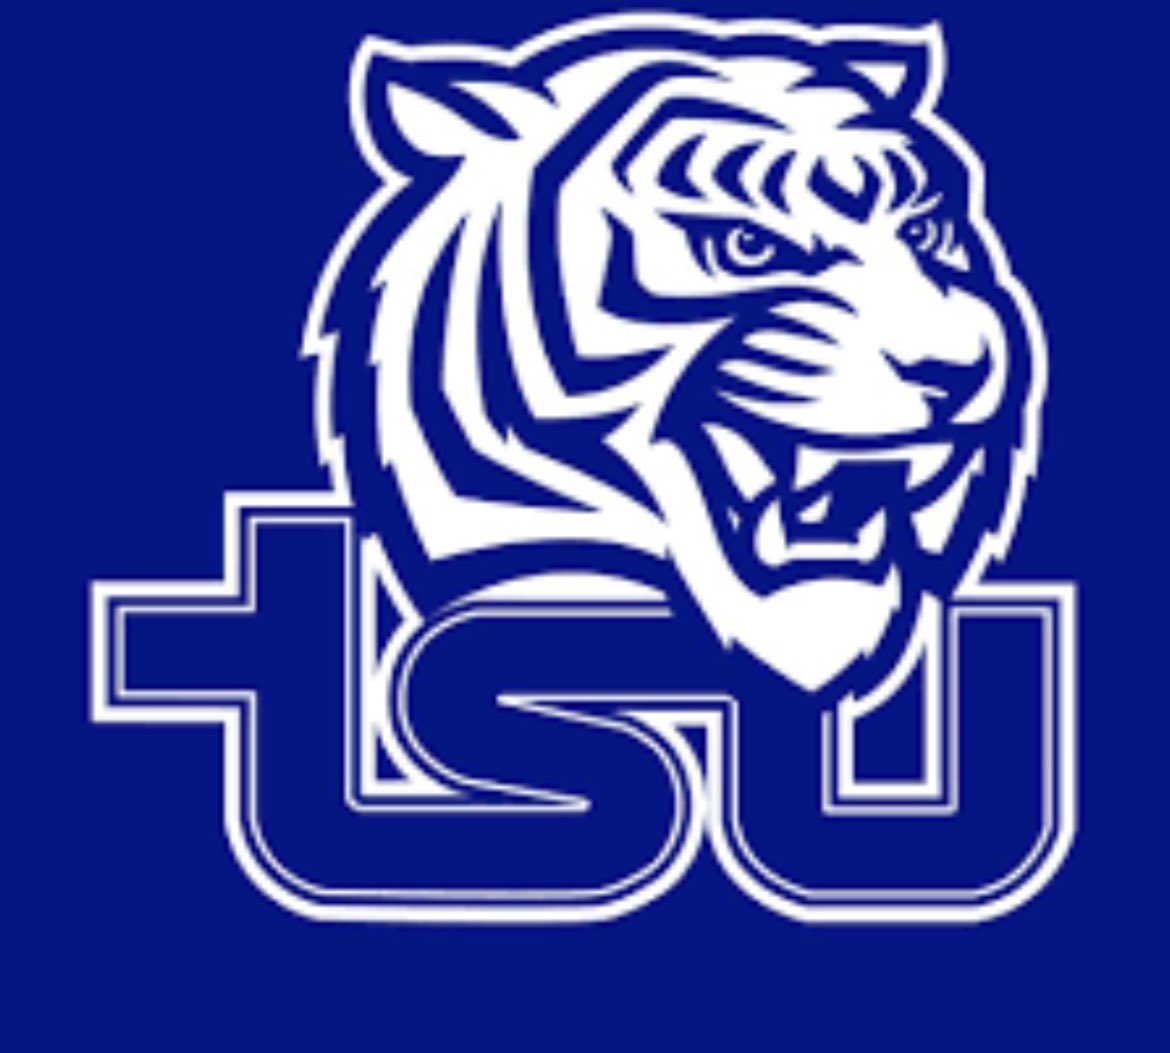 After a great talk with @coachbowdown58 I am blessed and honored to received my first offer from Tennessee State University! @twftraining @CoachB_Miller @coach_meger @PlanoFootball